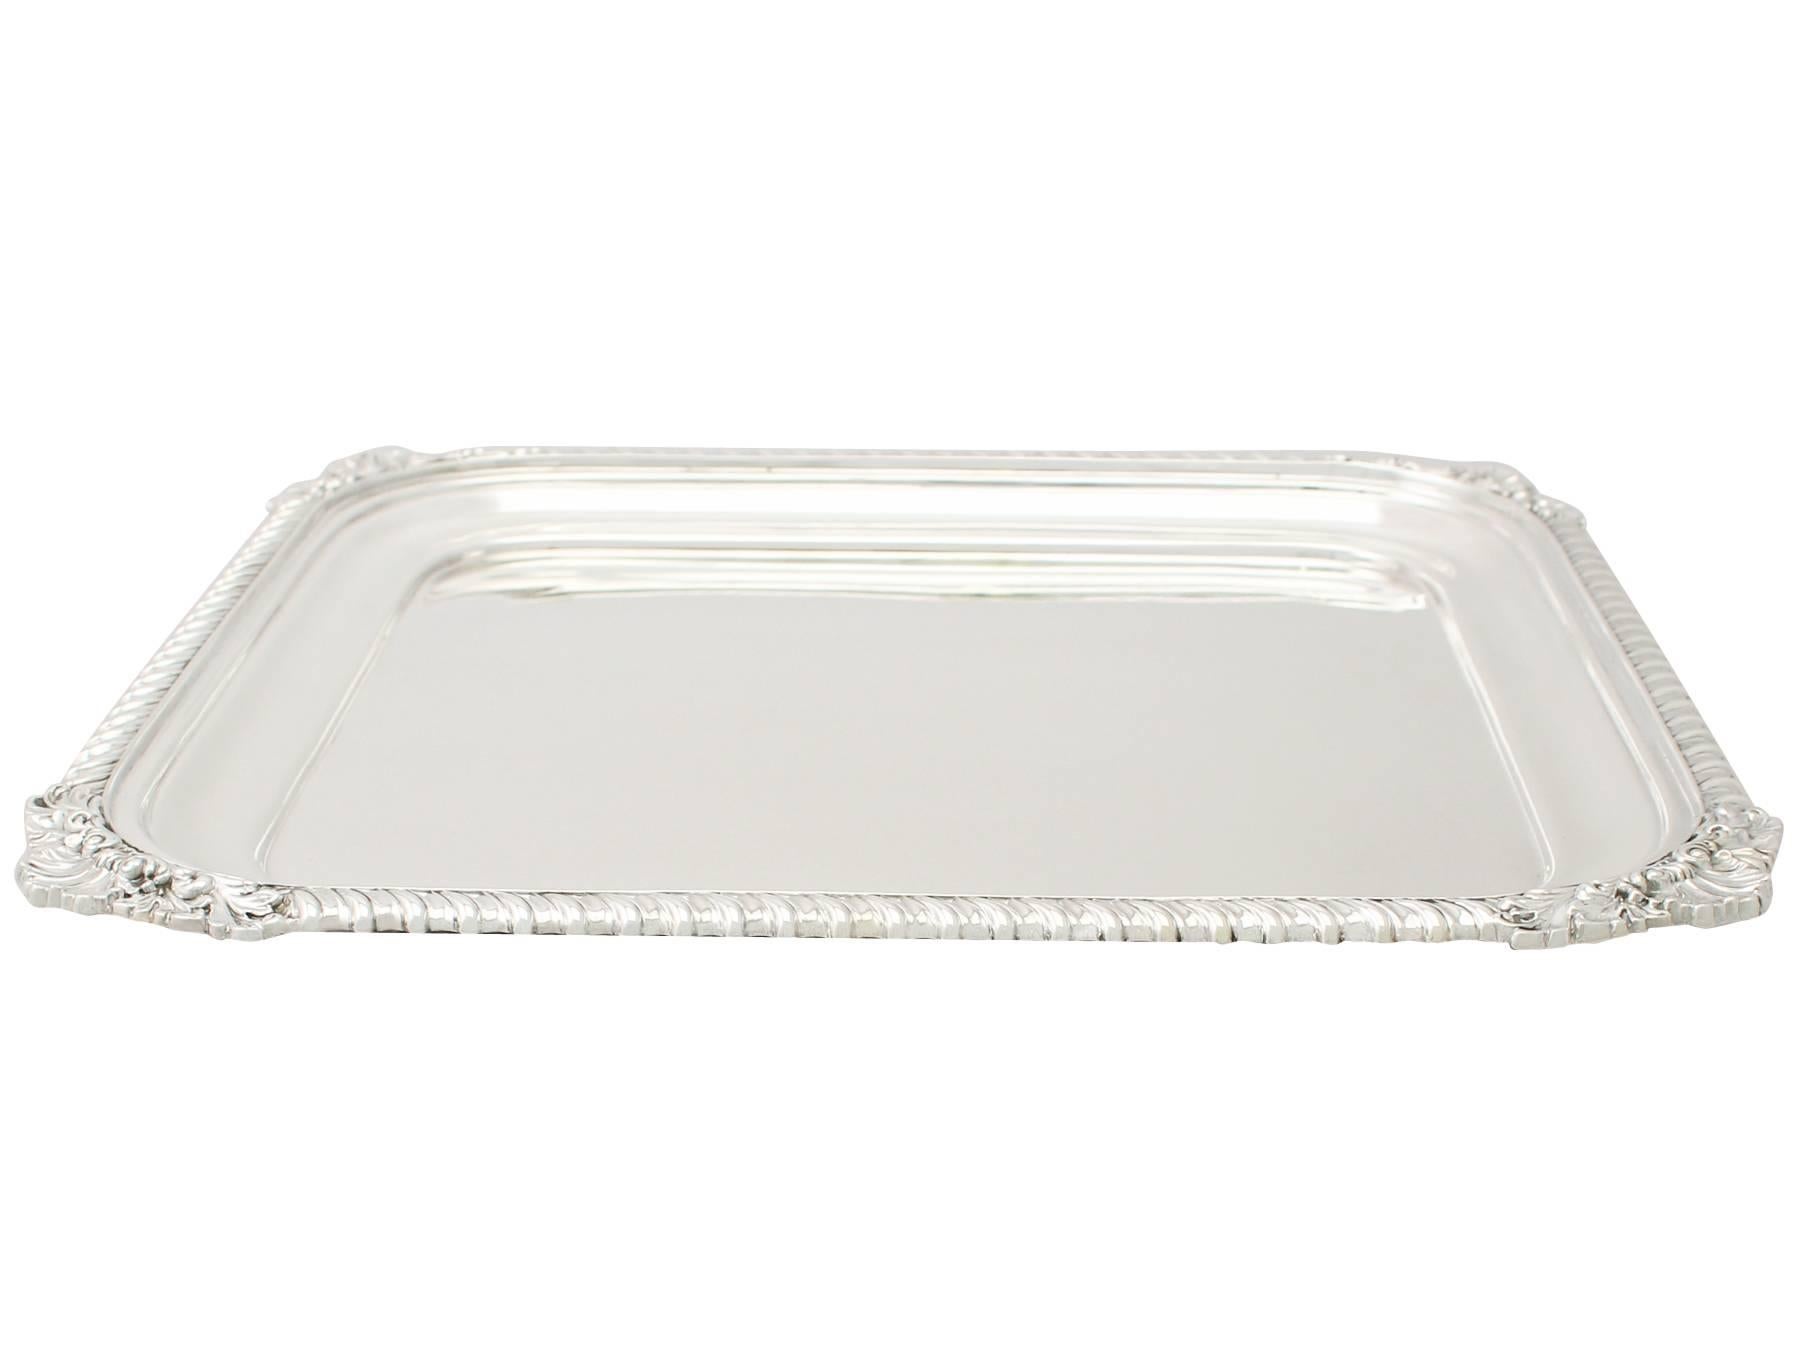 A fine and impressive antique George V English sterling silver square shaped salver; an addition to our dining silverware collection.

This fine antique George V sterling silver salver has a plain square form with rounded corners.

The surface